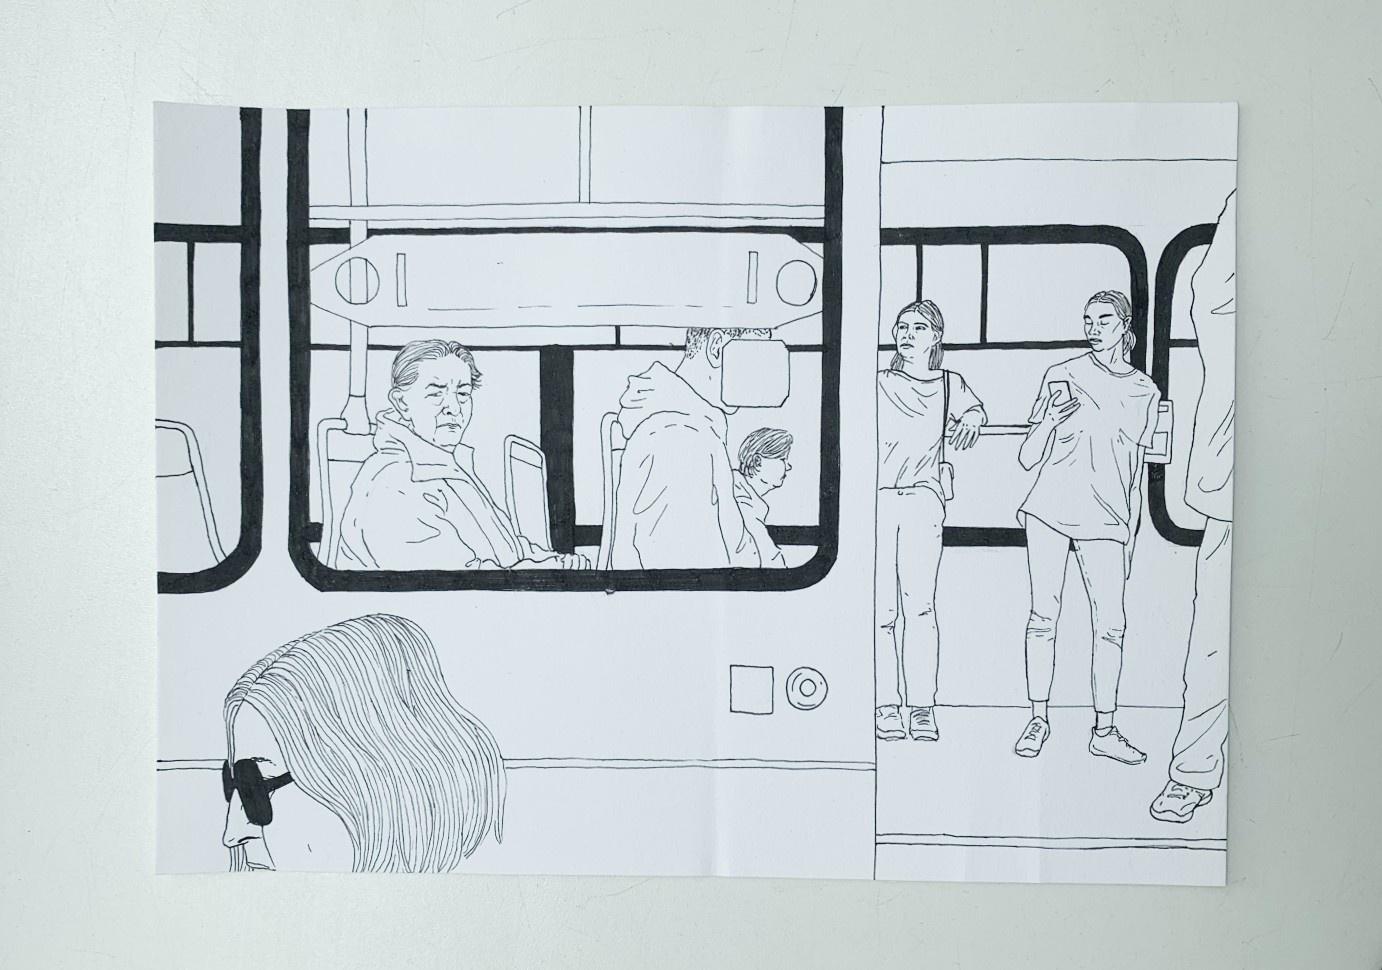 Streetcar - Contemporary ink drawing, Young art, Minimalism, Social commentary - Art by Anna Wardega